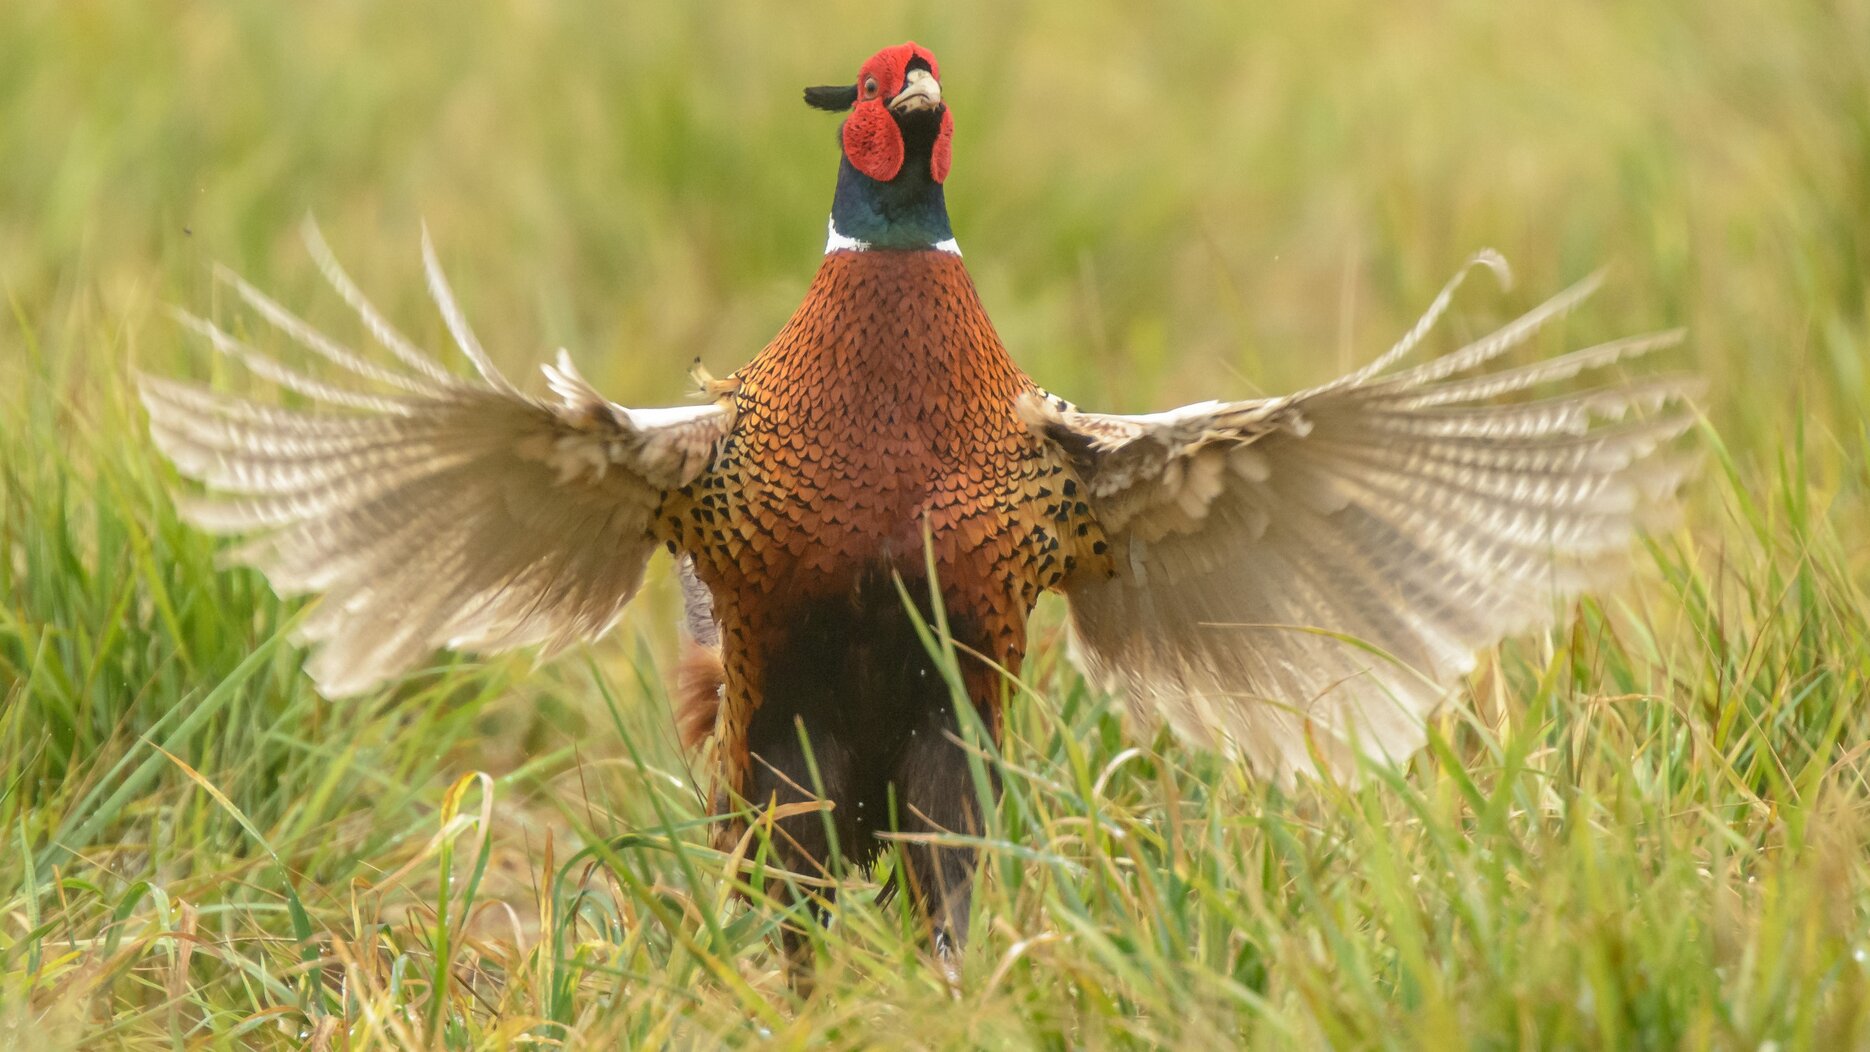 A male Ring-necked Pheasant performing a “drumming” breeding display. Photo: Steven Kersting/CC BY-NC-ND 2.0